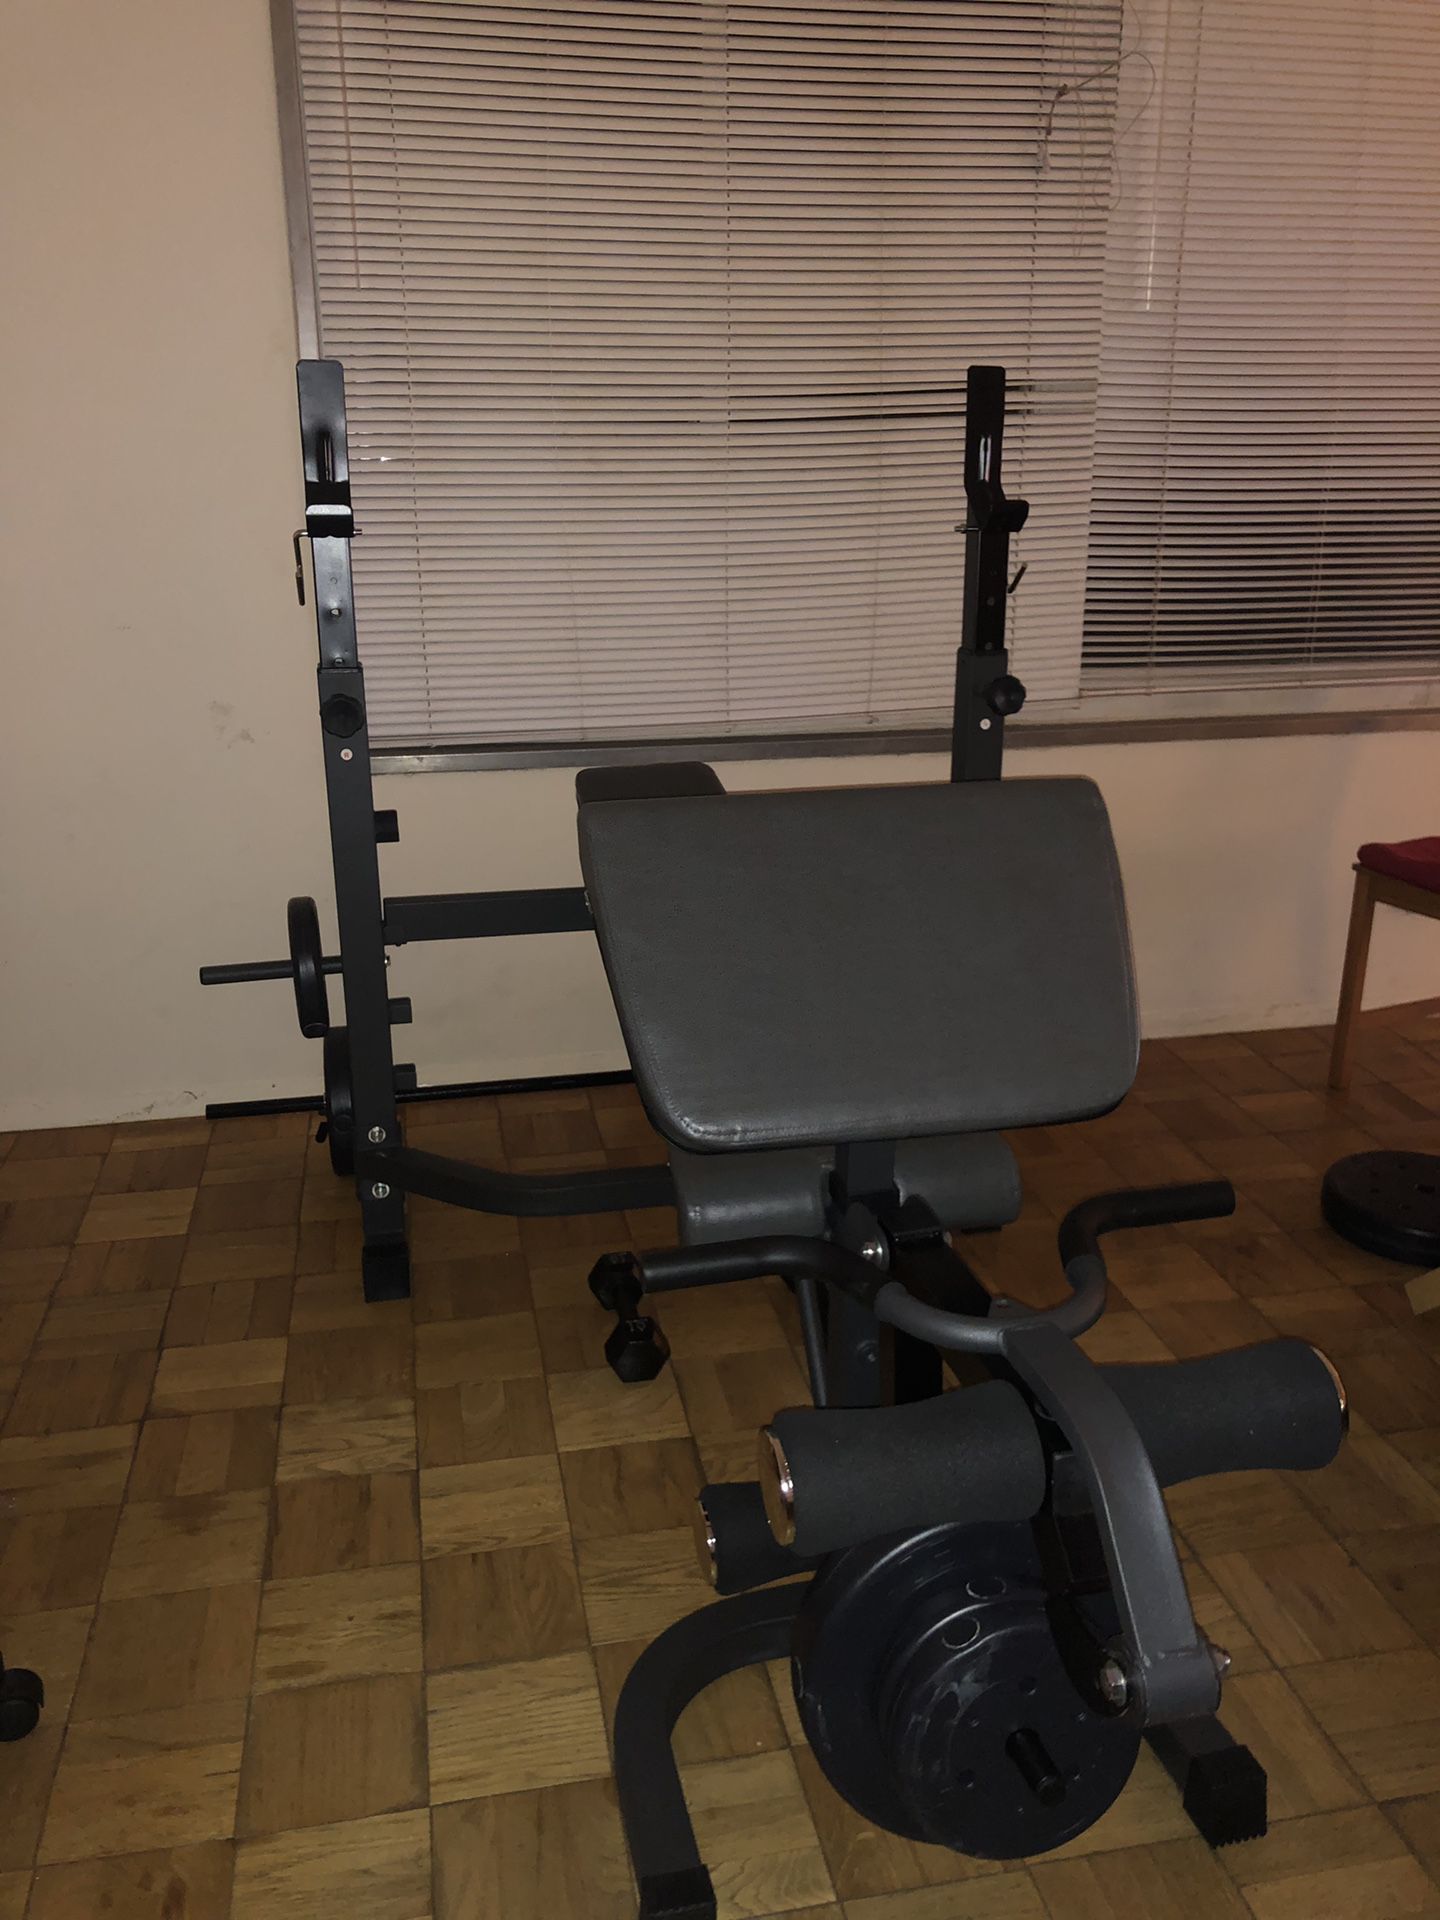 Weight Bench and Duracast Barbell Weight